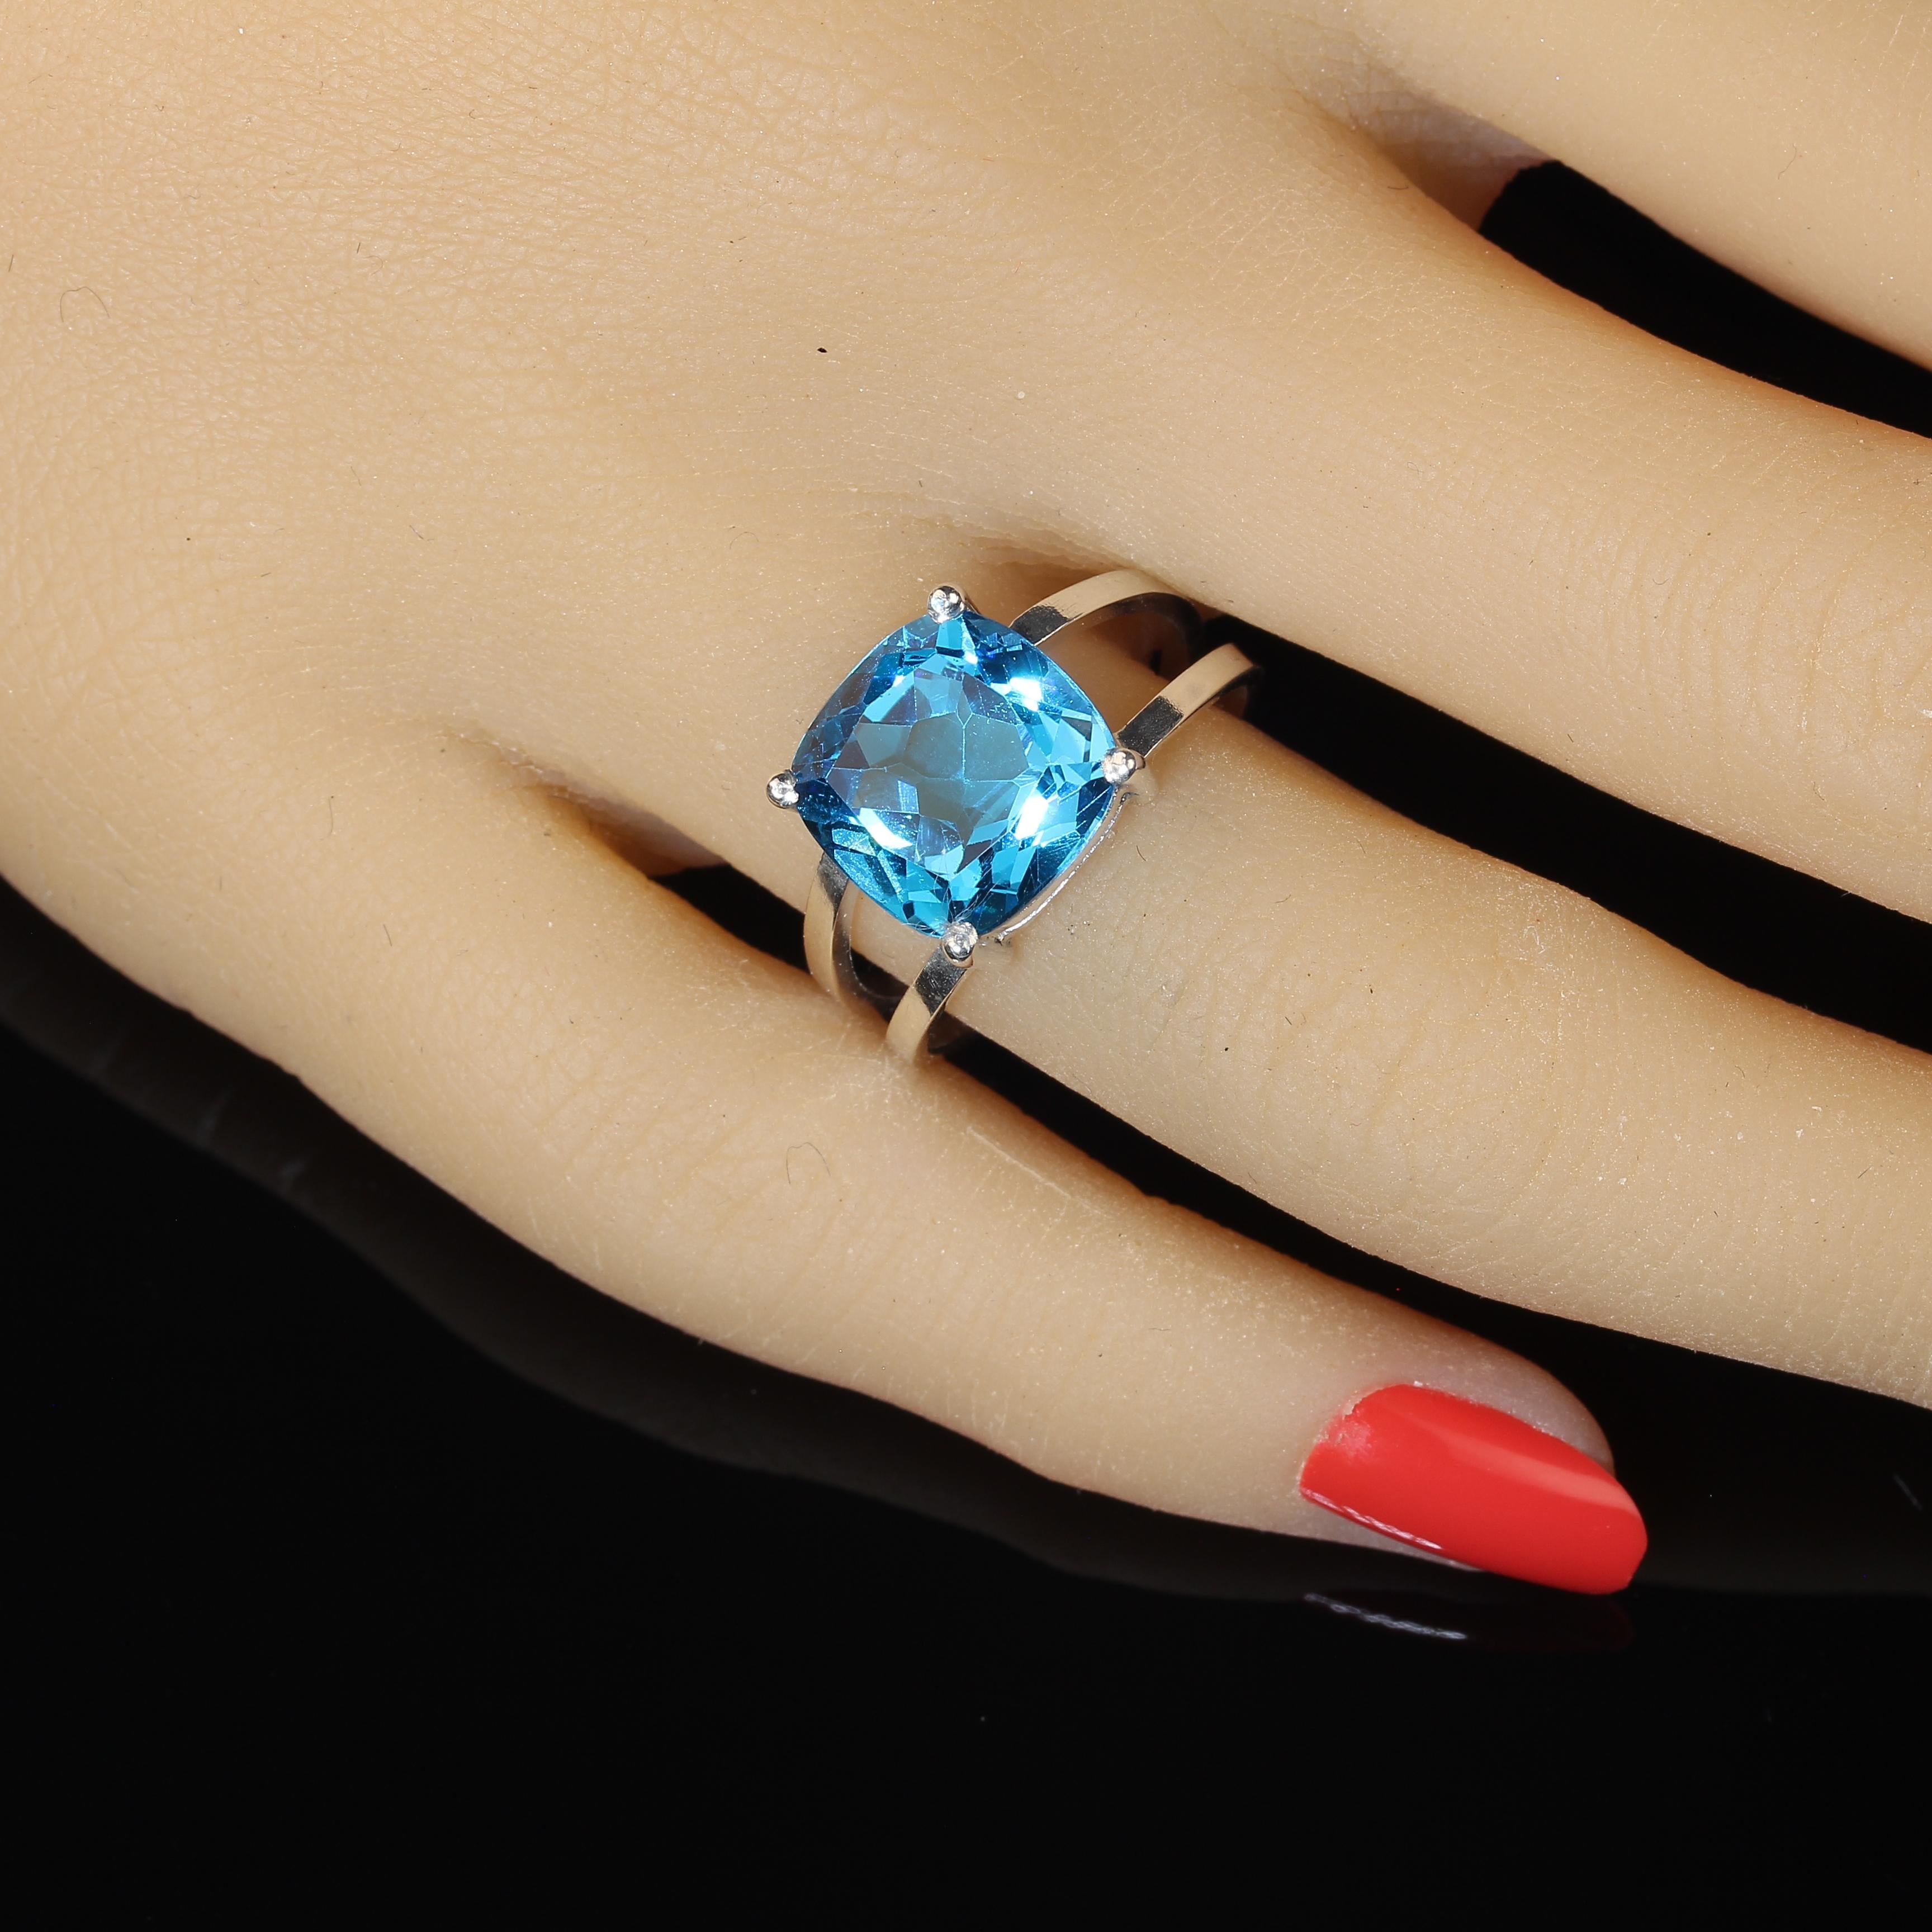 Scintillating Antique Cushion Cut 6Ct Swiss Blue Topaz set in a handmade Sterling Silver settng.  This setting was custom made in the studio of our favorite vendor in Belo Horizonte, Minas Gerais, Brasil.  This gorgeous gemstone sits in a basket